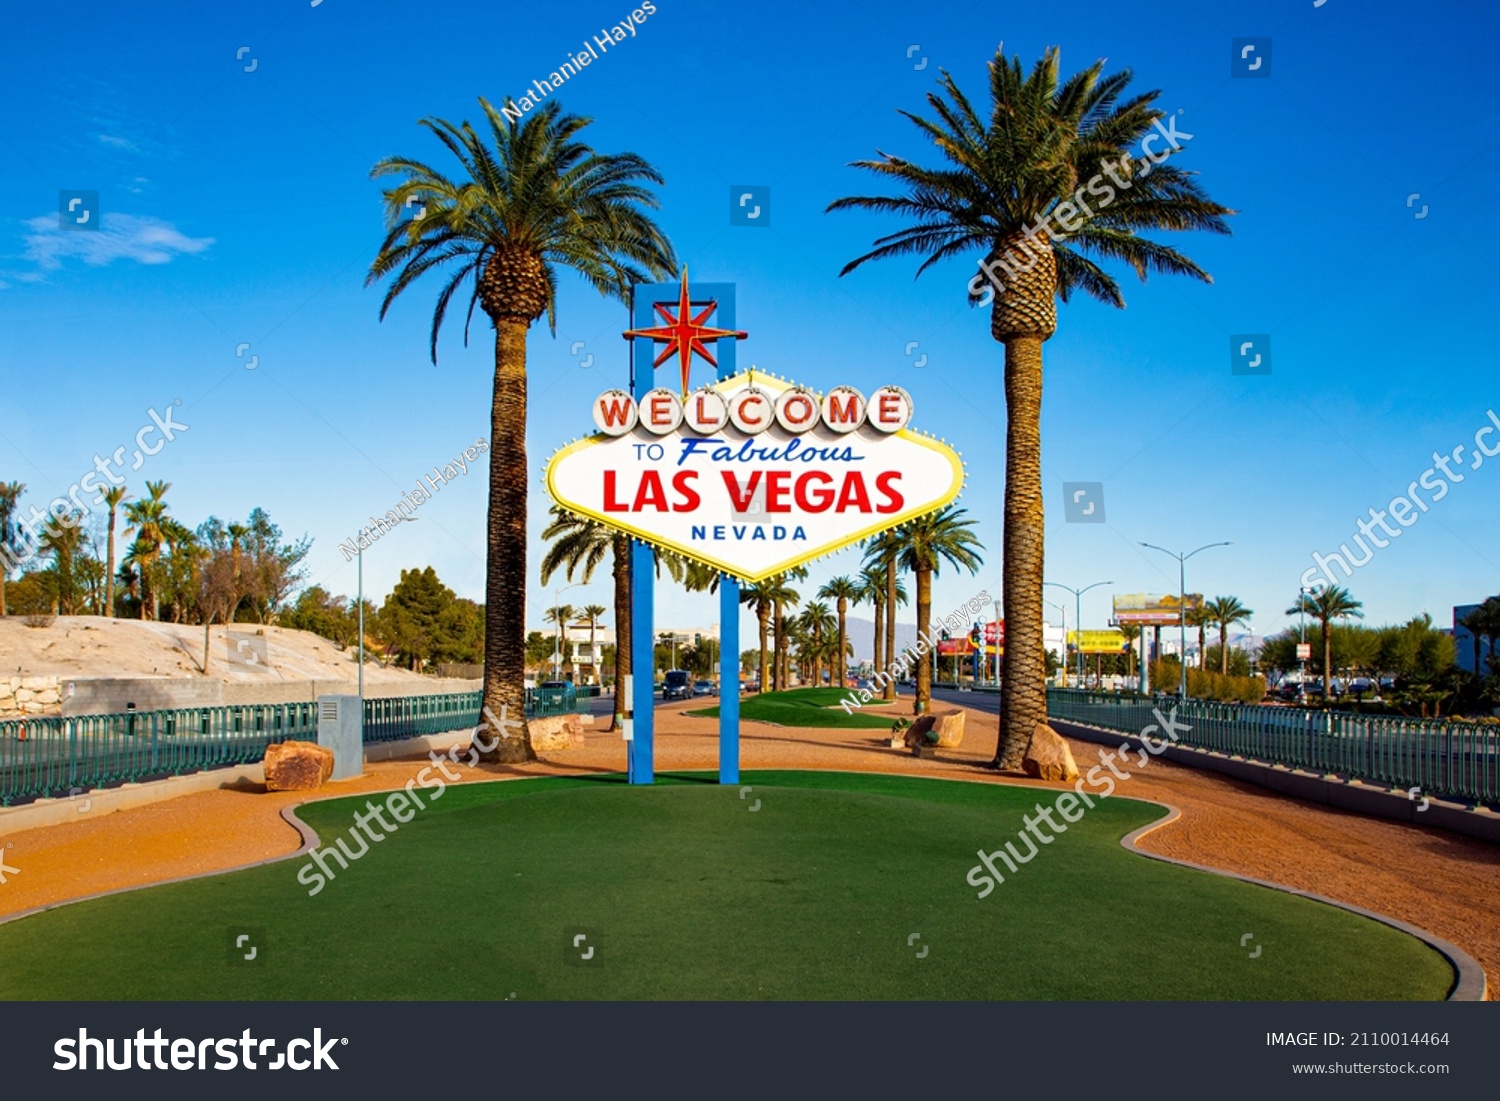 Welcome To Fabulous Las Vegas Nevada Sign.  Clean, Wires, Hotels removed.  #2110014464